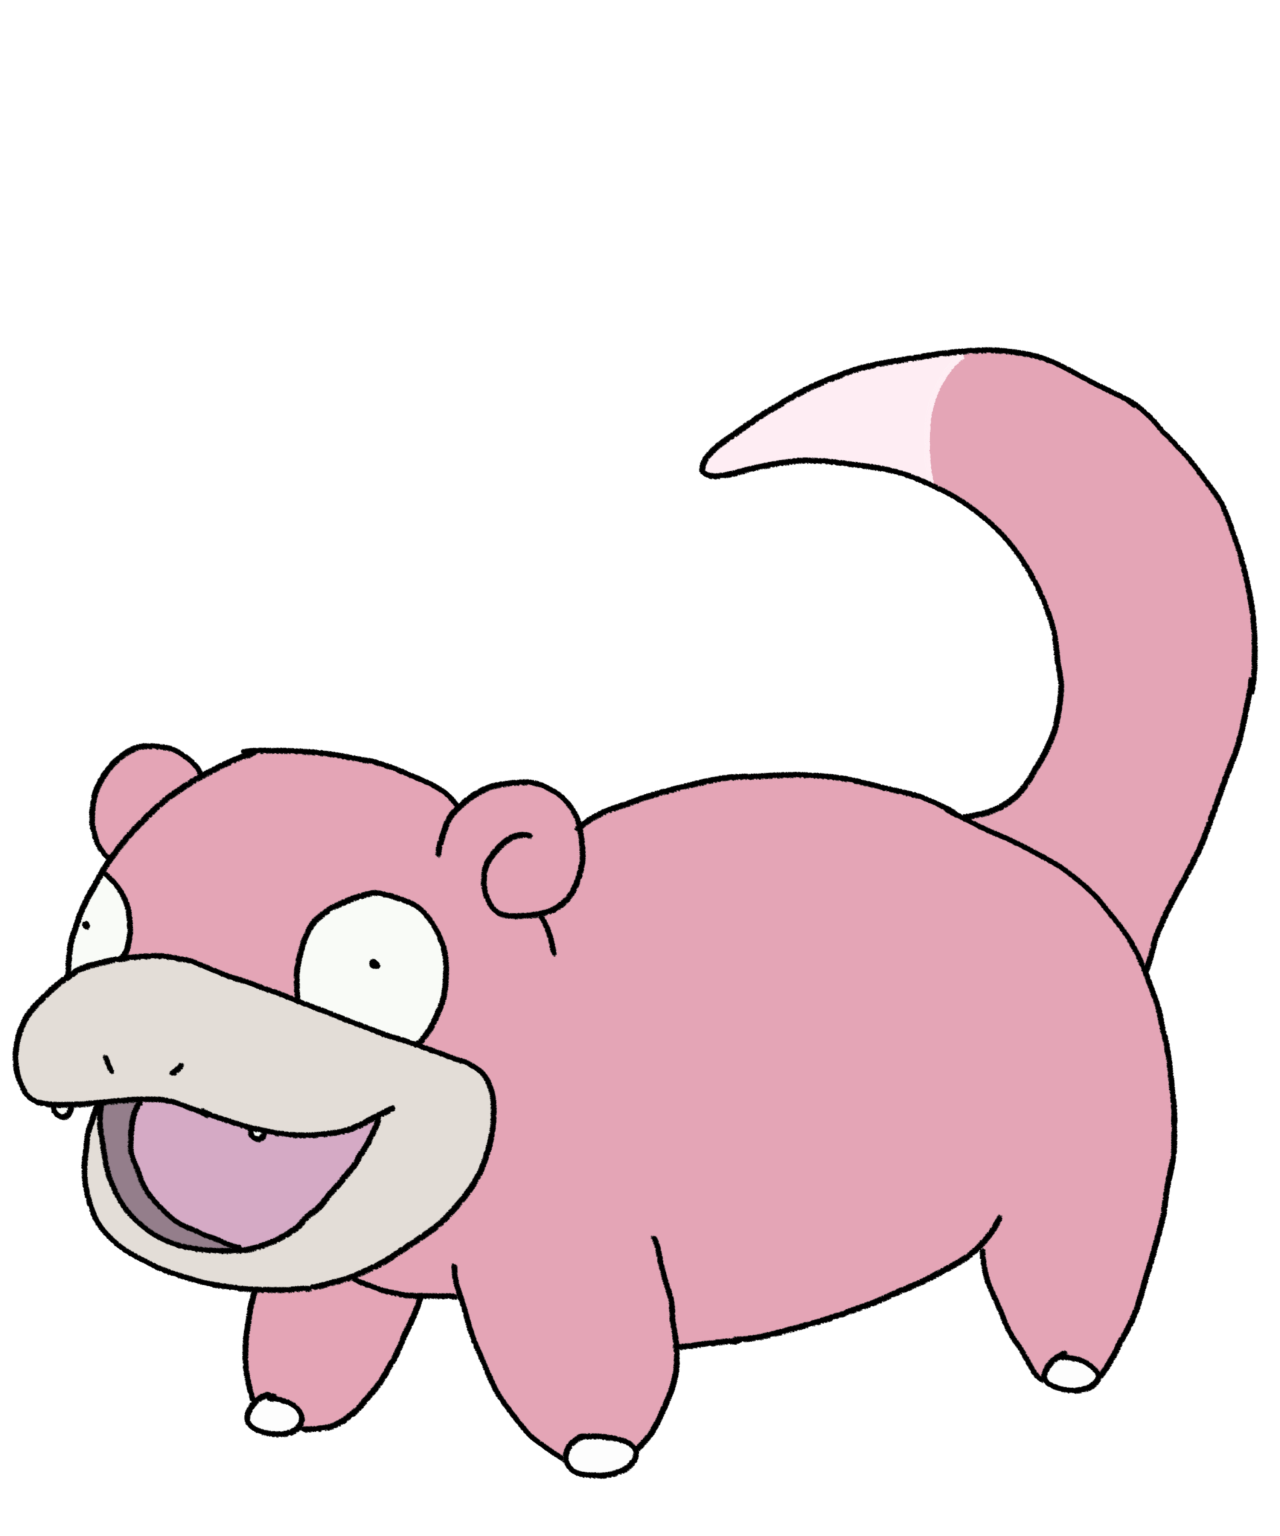 Slowking Pokemon PNG Picture